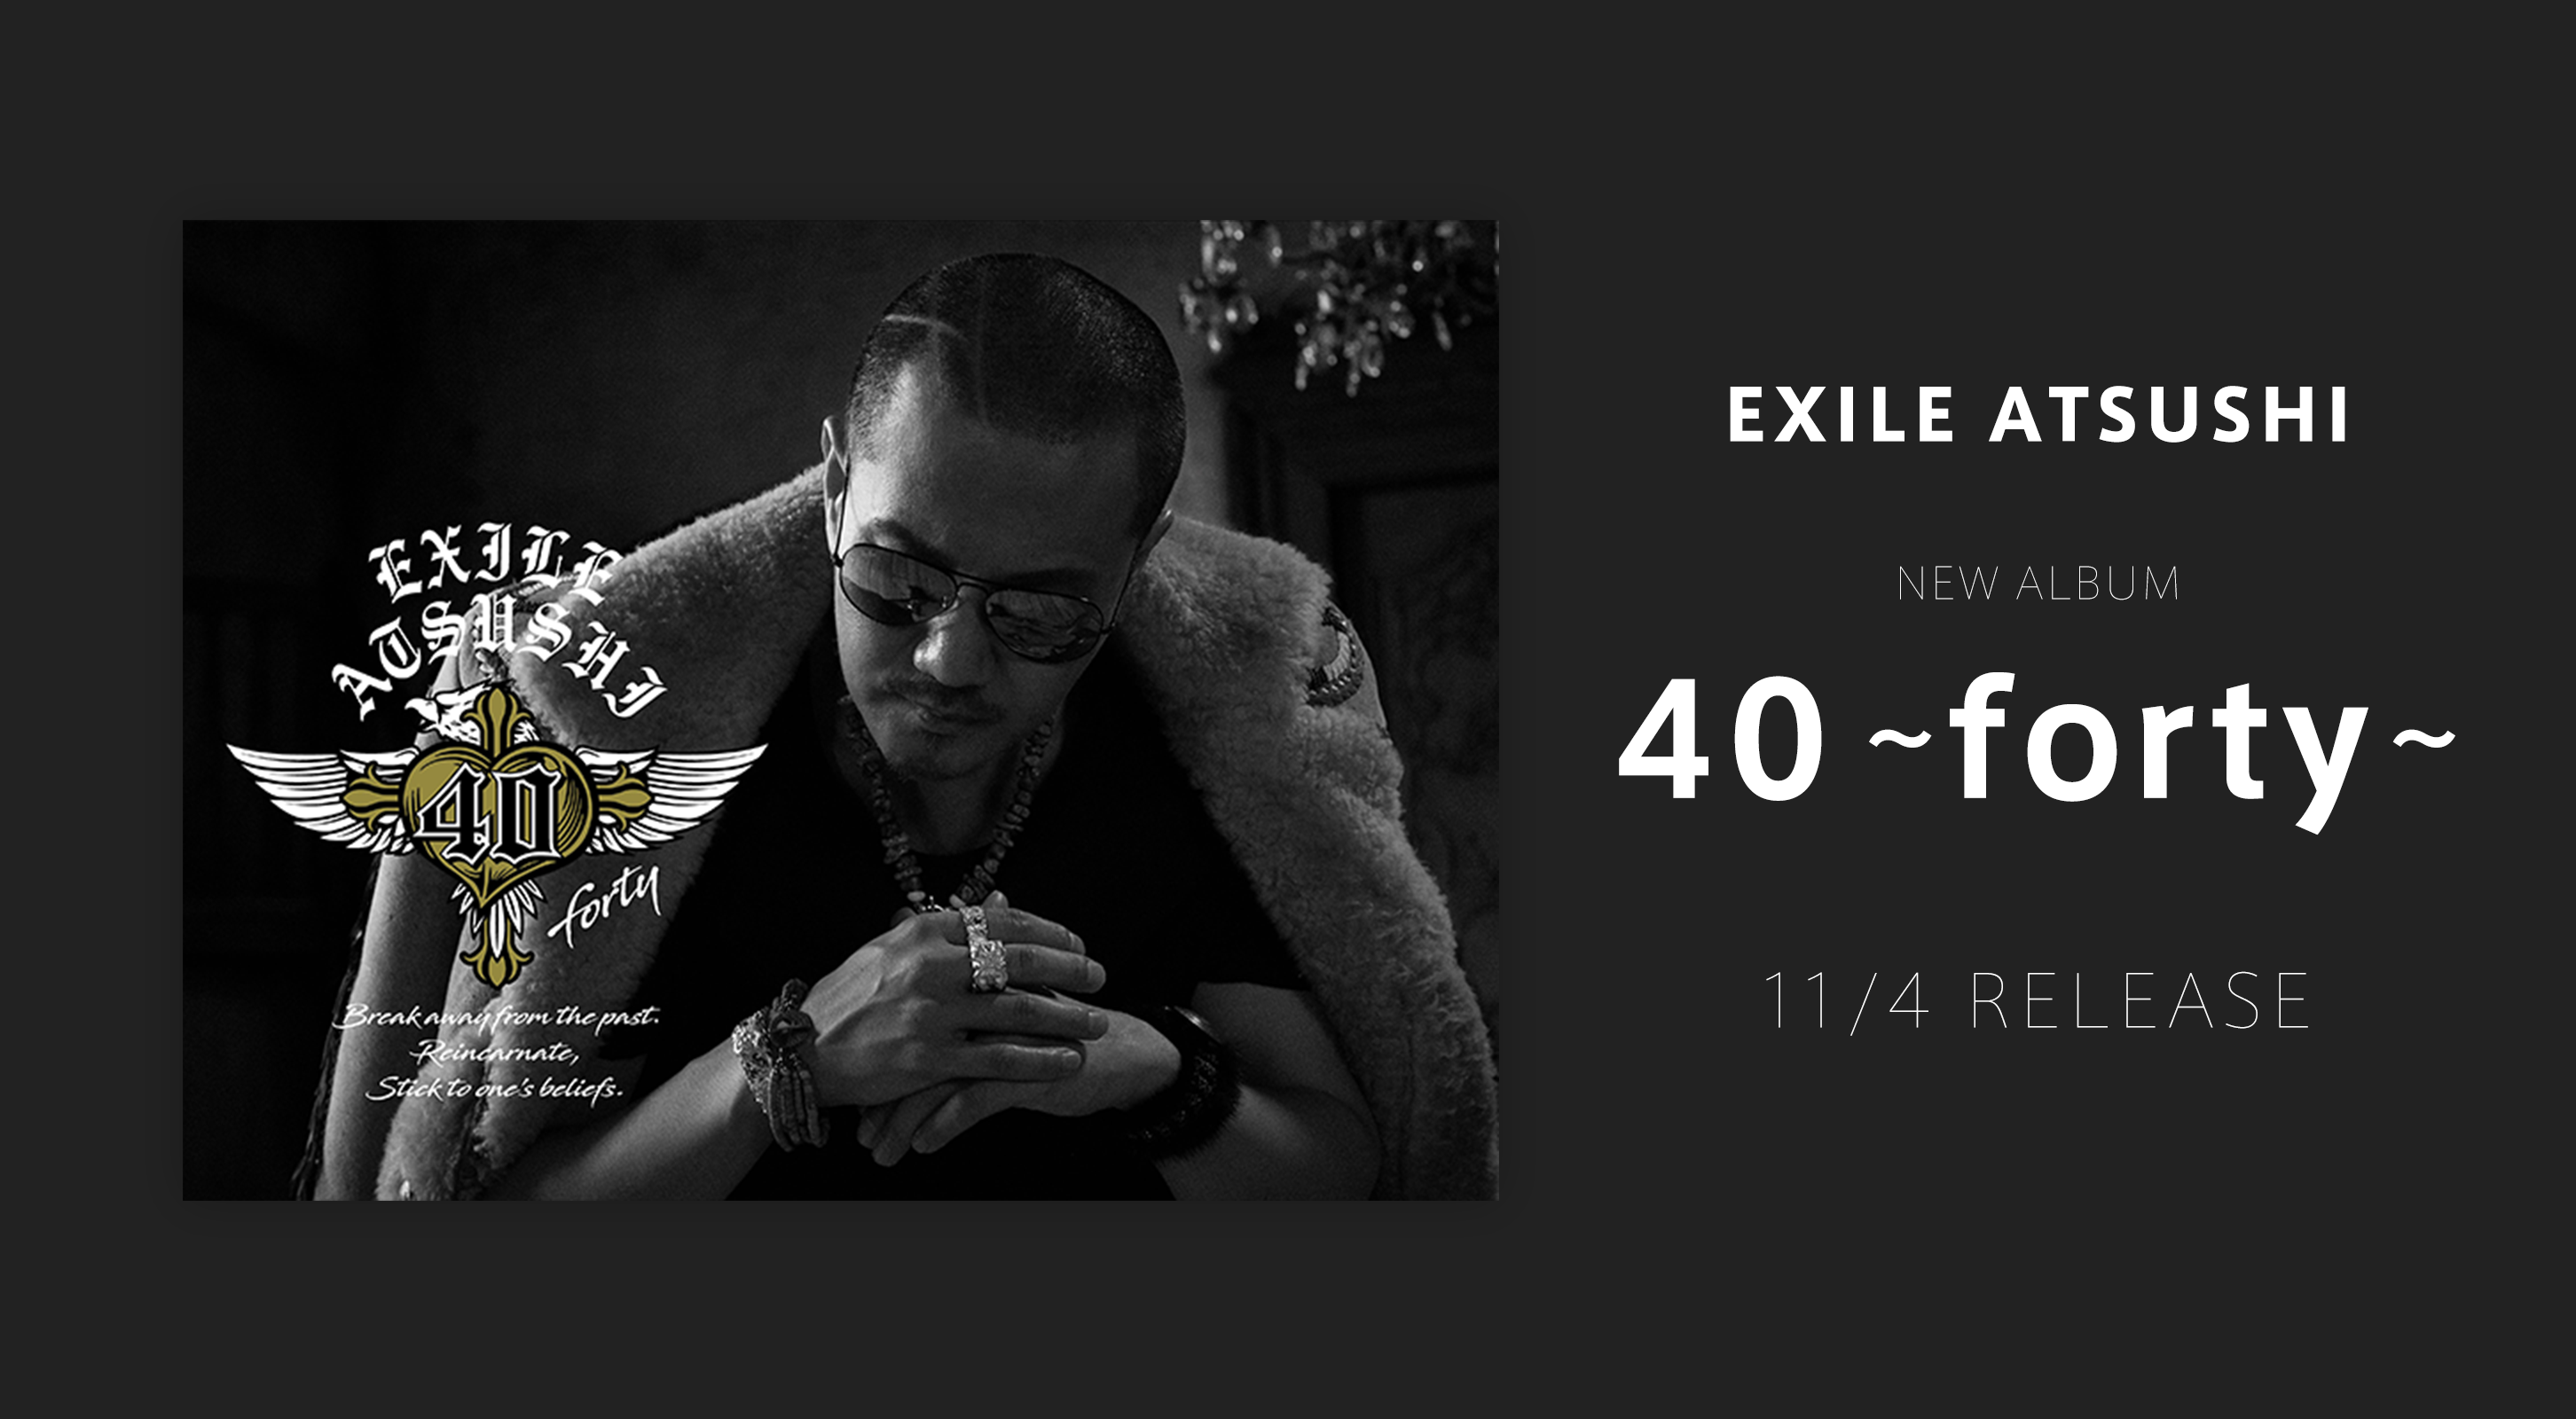 EXILE ATSUSHI NEW ALBUM「40 ～forty～」11/4 RELEASE